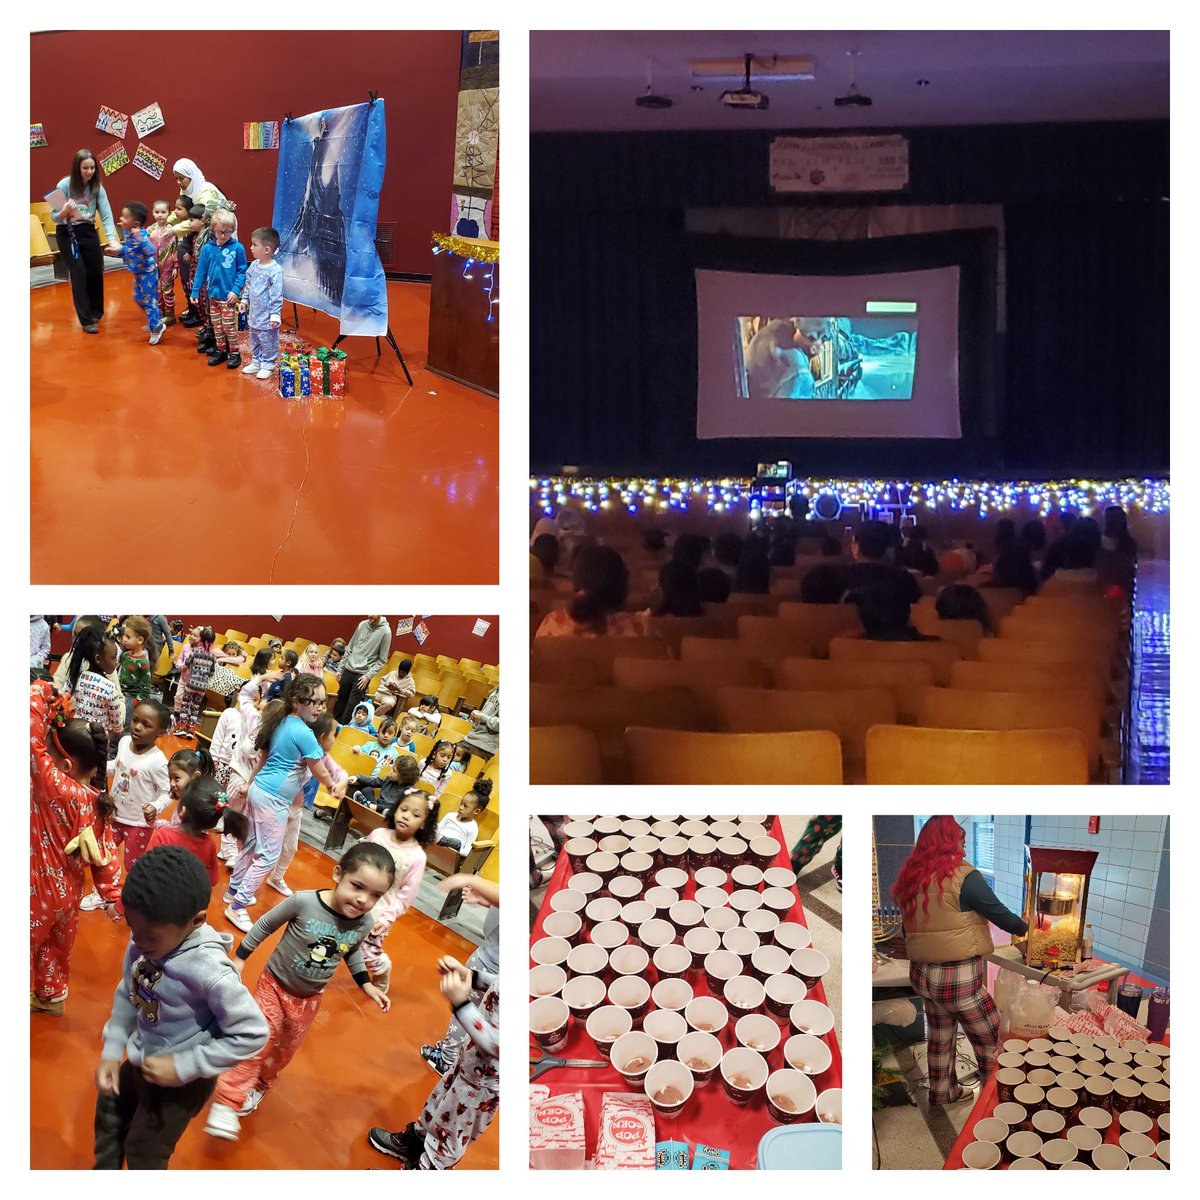 Polar Express Day at @PS16School dance parties, movies, popcorn, hot cocoa, pajamas, but the best thing were the 400 smiling kids who had a great day! @MRamos16R @ChrissyVigsPS16 @NYCDOEOLS